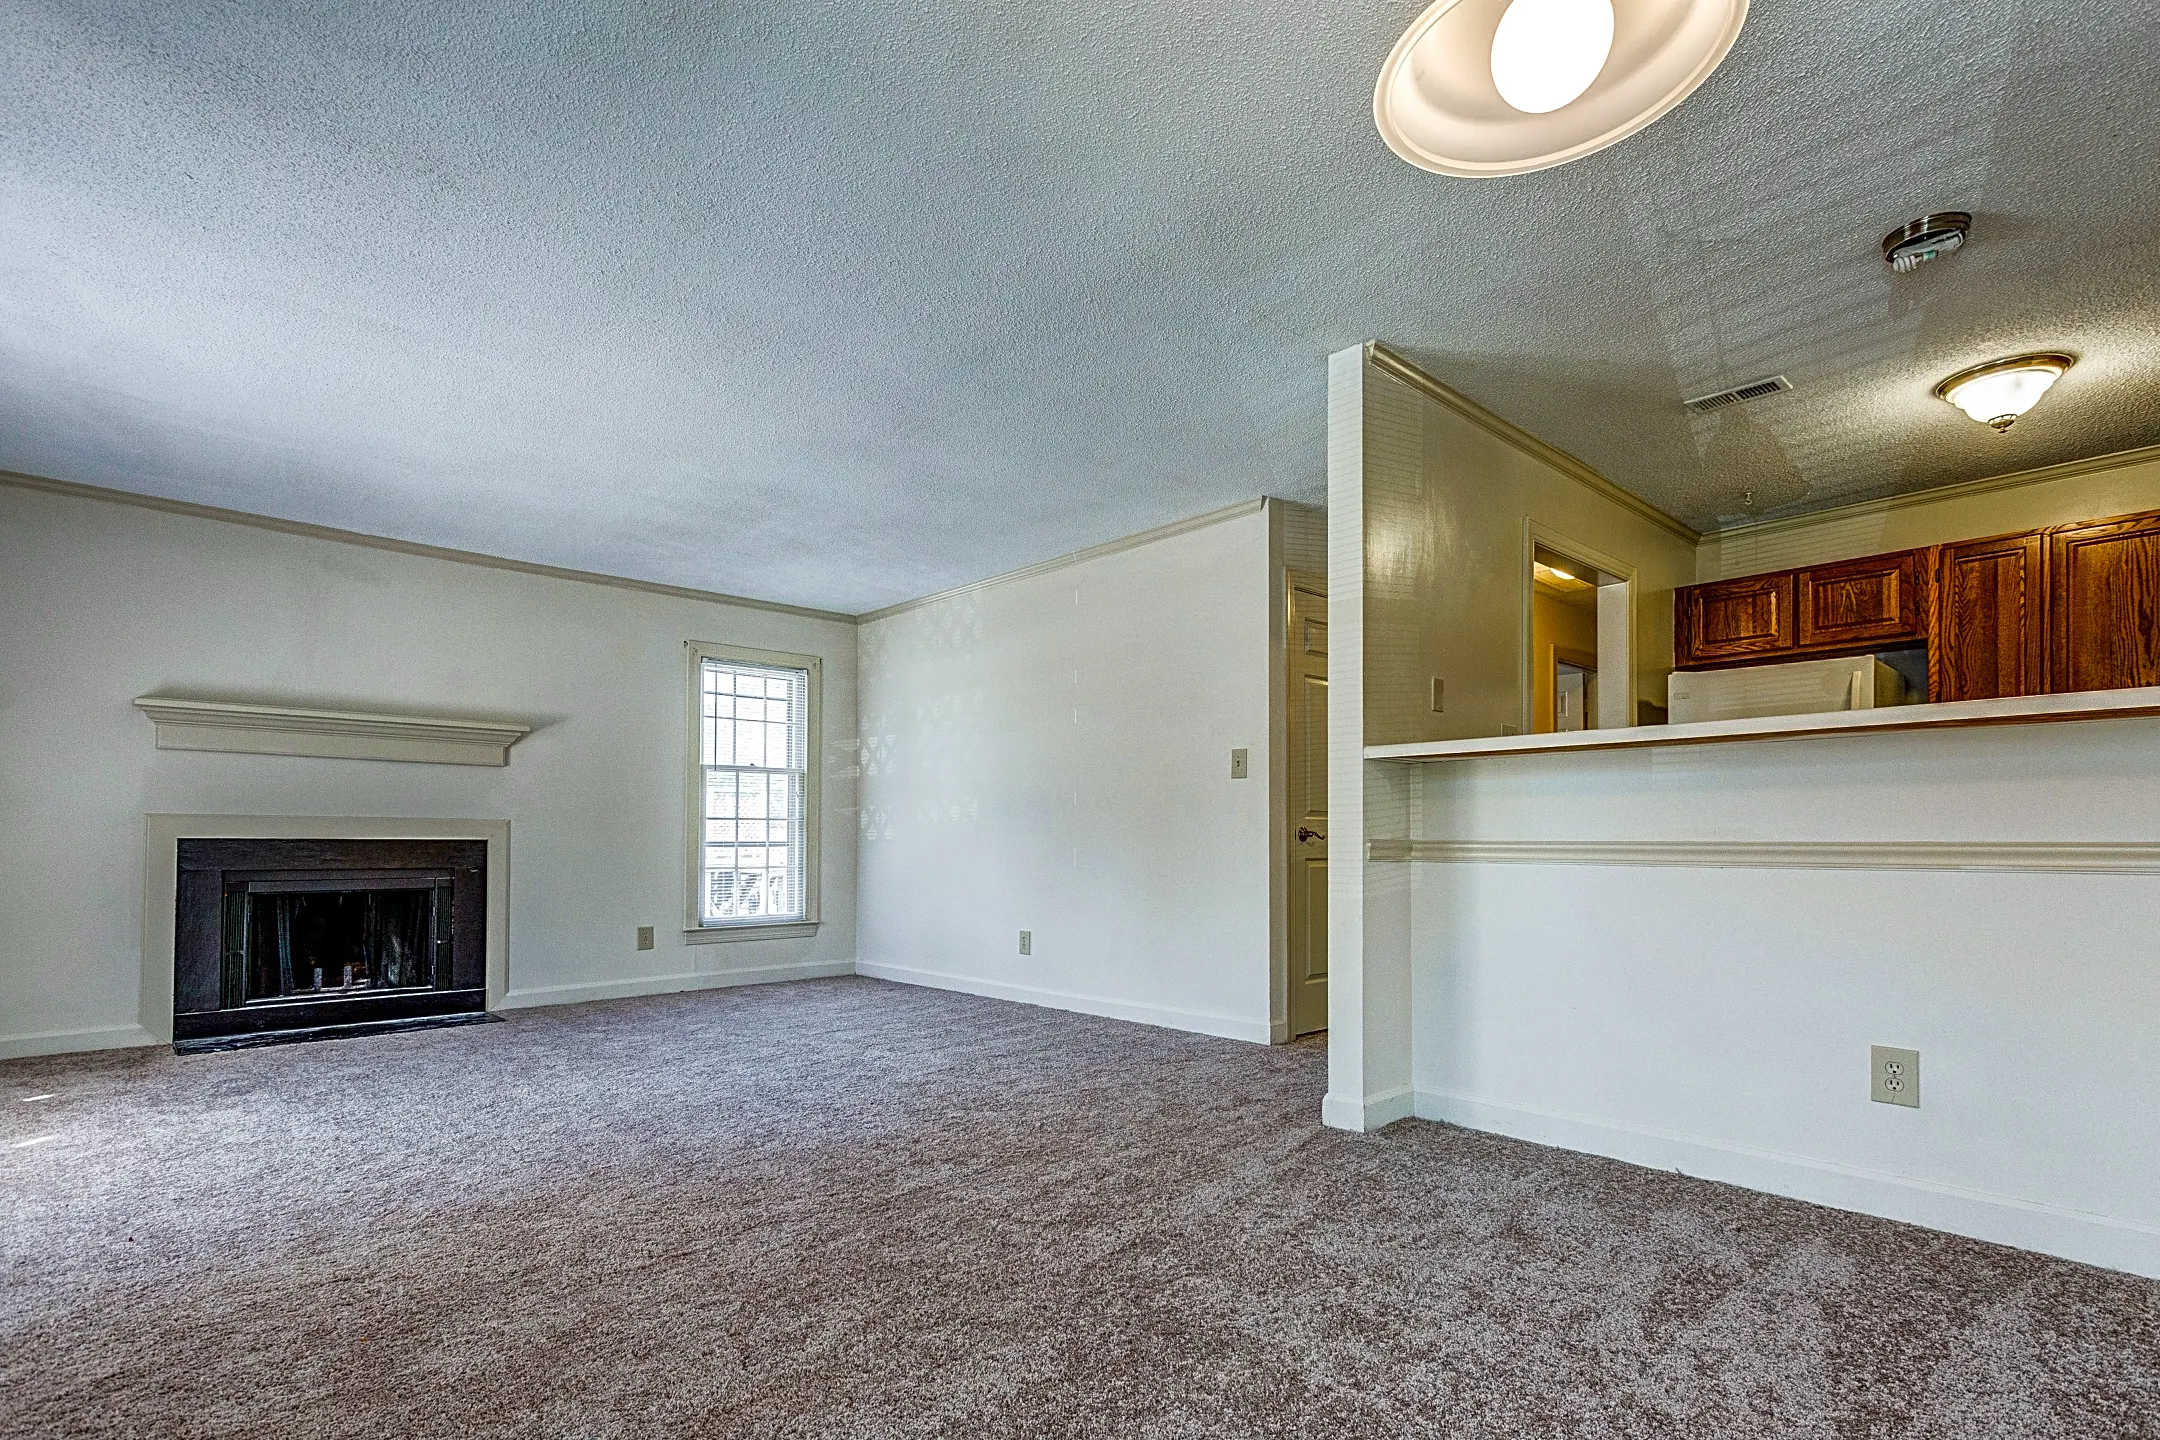 Turtle Cove Apartments - 5701 Turtle Cv | Raleigh, NC Apartments for ...